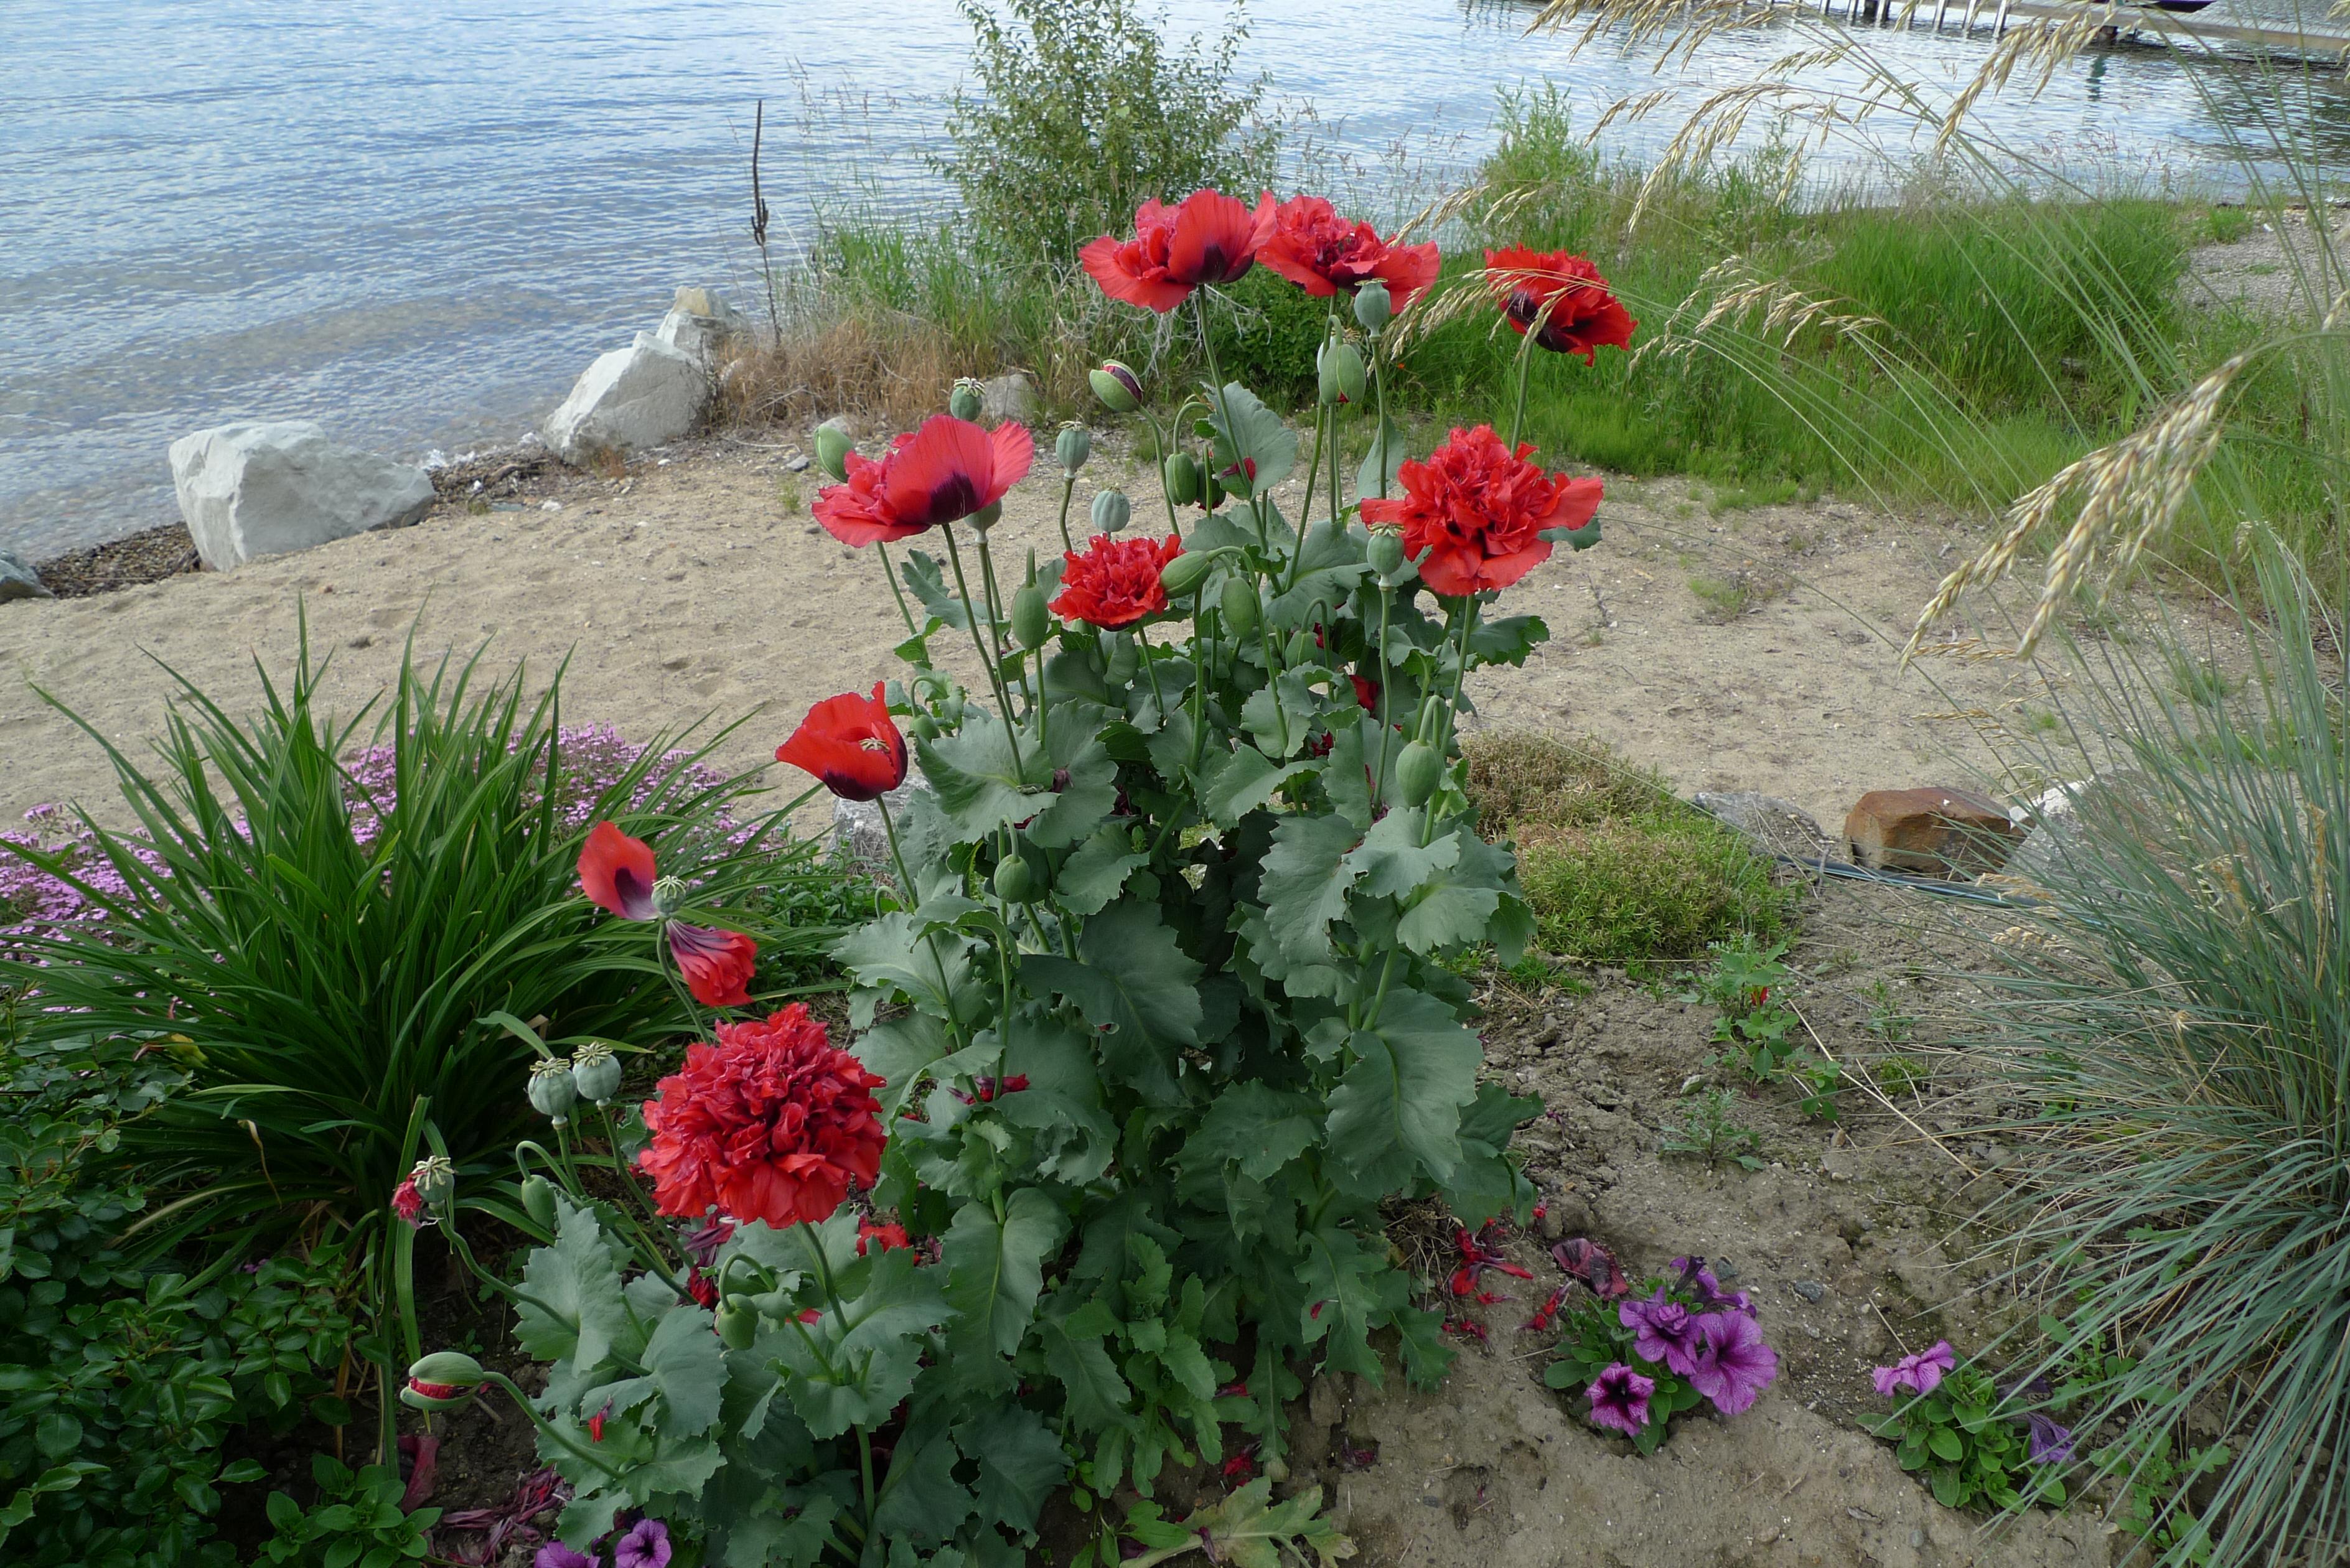 Beach Flowers High Quality And Resolution Wallpaper On